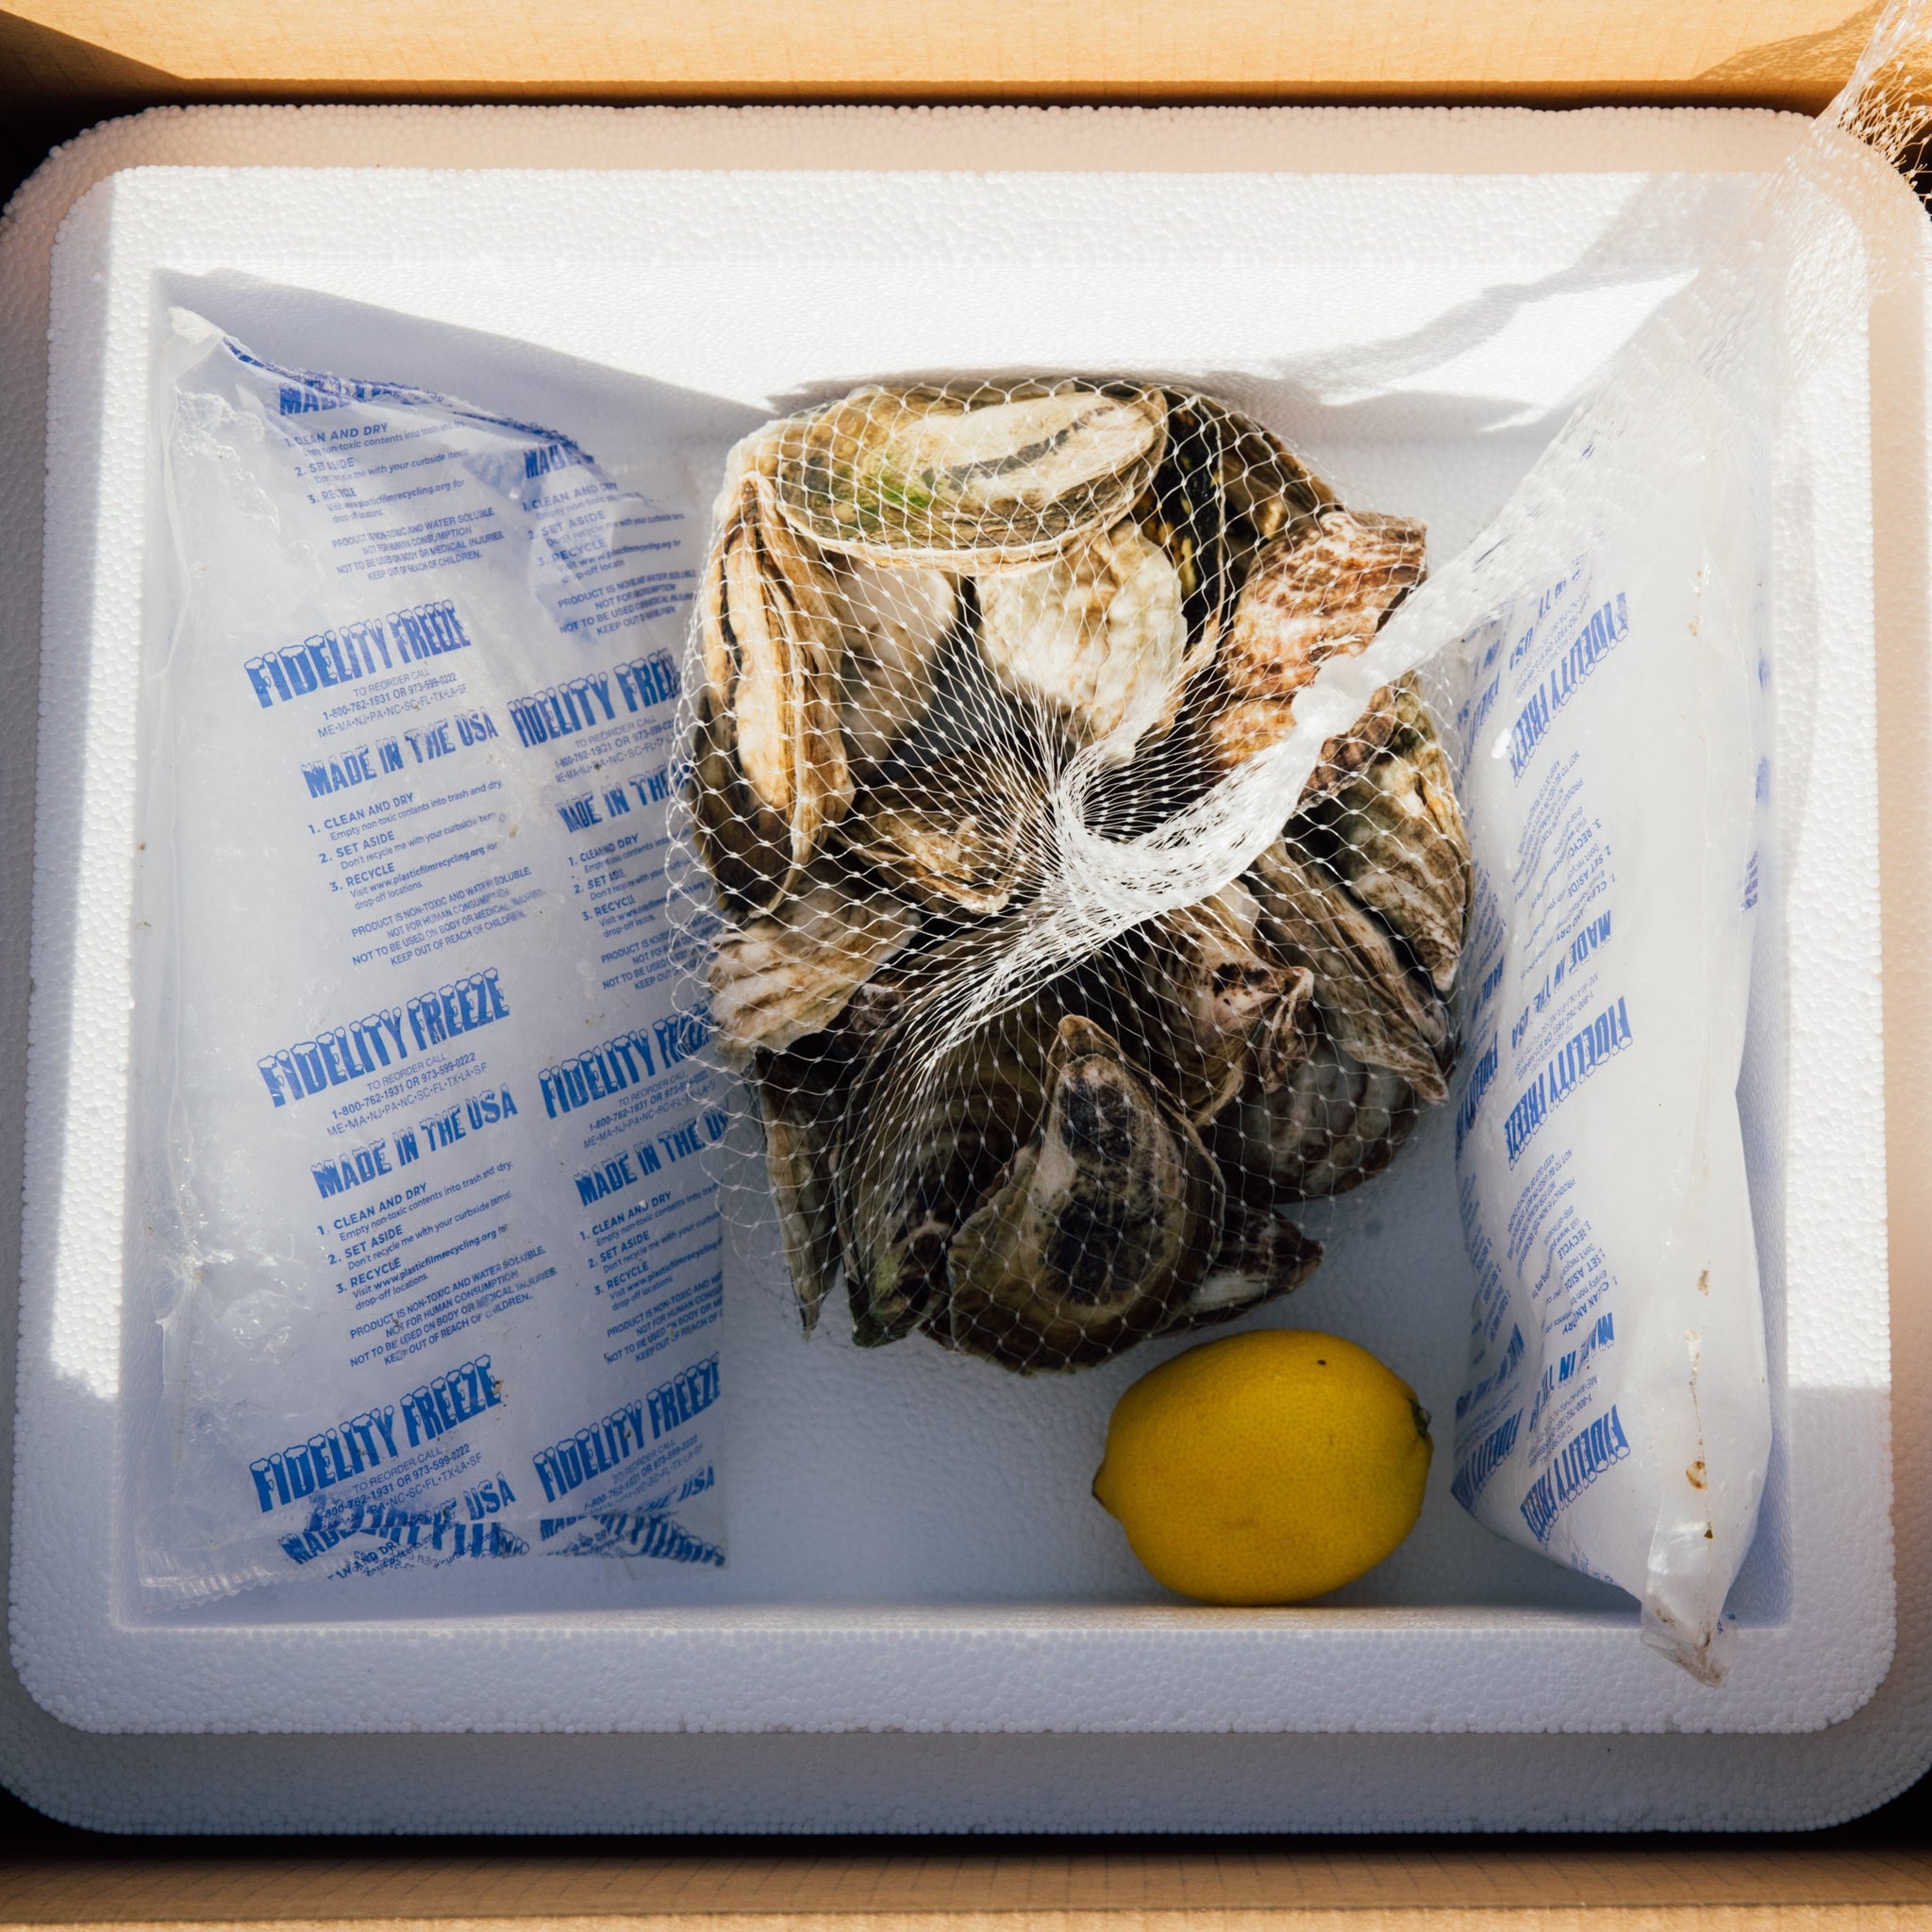 Sugar Shack Oyster Party Pack